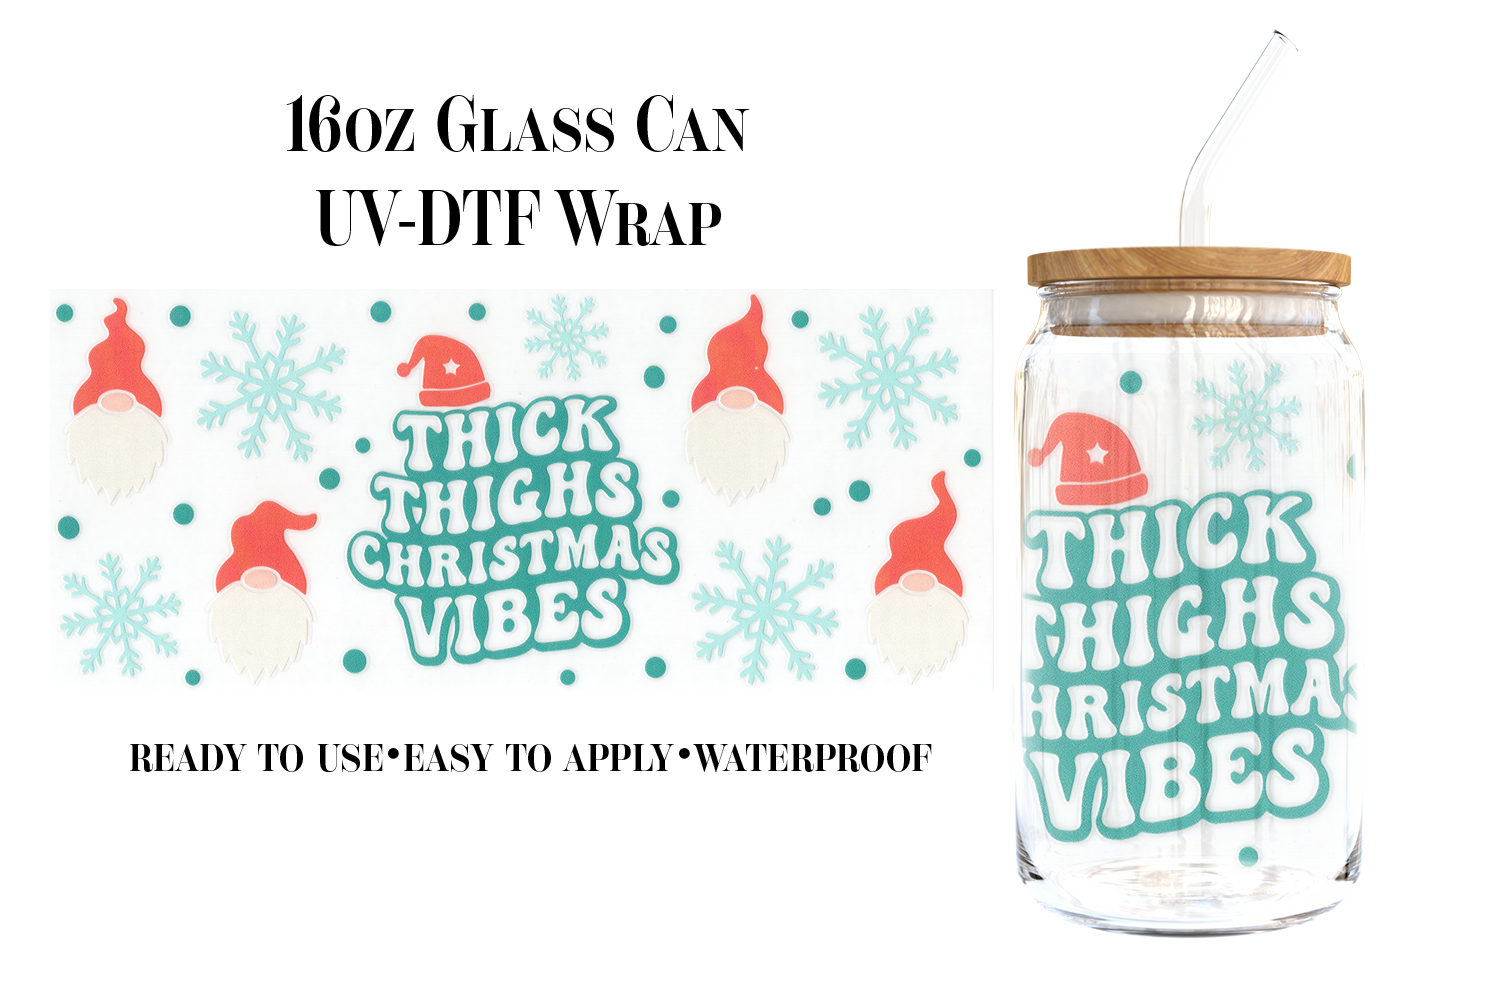 #151) Thick Thighs Christmas Vibes UVDTF 16oz Wrap